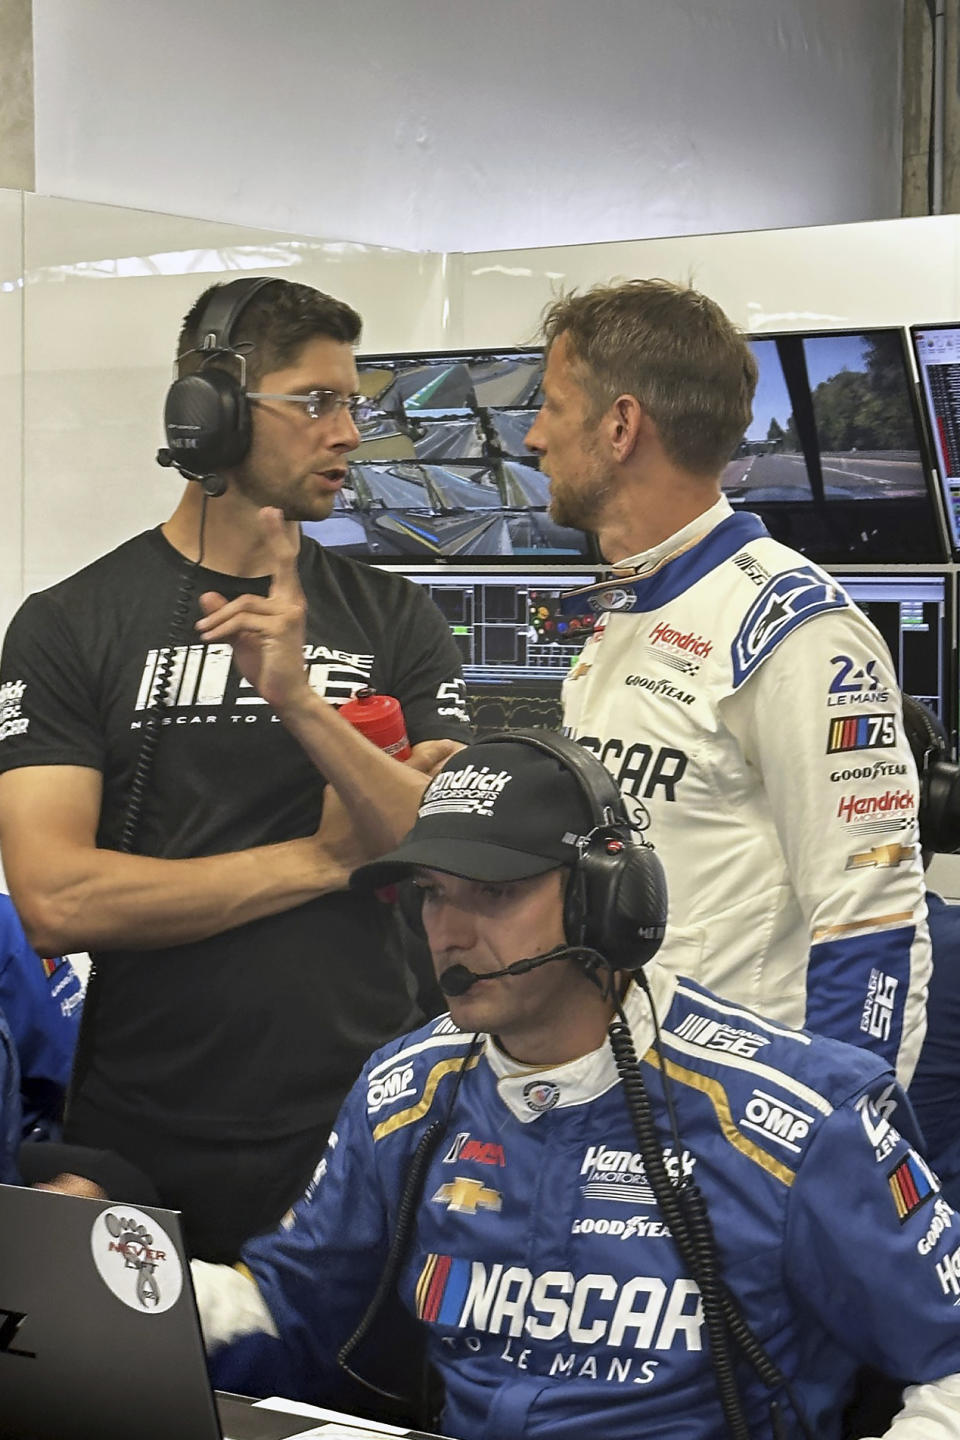 Sports car driver Jordan Taylor, left, talks with 2009 Formula One champion Jenson Button during practice for the 24 Hours of Le Mans auto race in Le Mans, France, Thursday, June 8, 2023. Hendrick project manager Greg Ives is in the foreground. Taylor helped develop the Garage 56 car that will be driven by Button, Jimmie Johnson and Mike Rockenfeller. (AP Photo/Jenna Fryer)